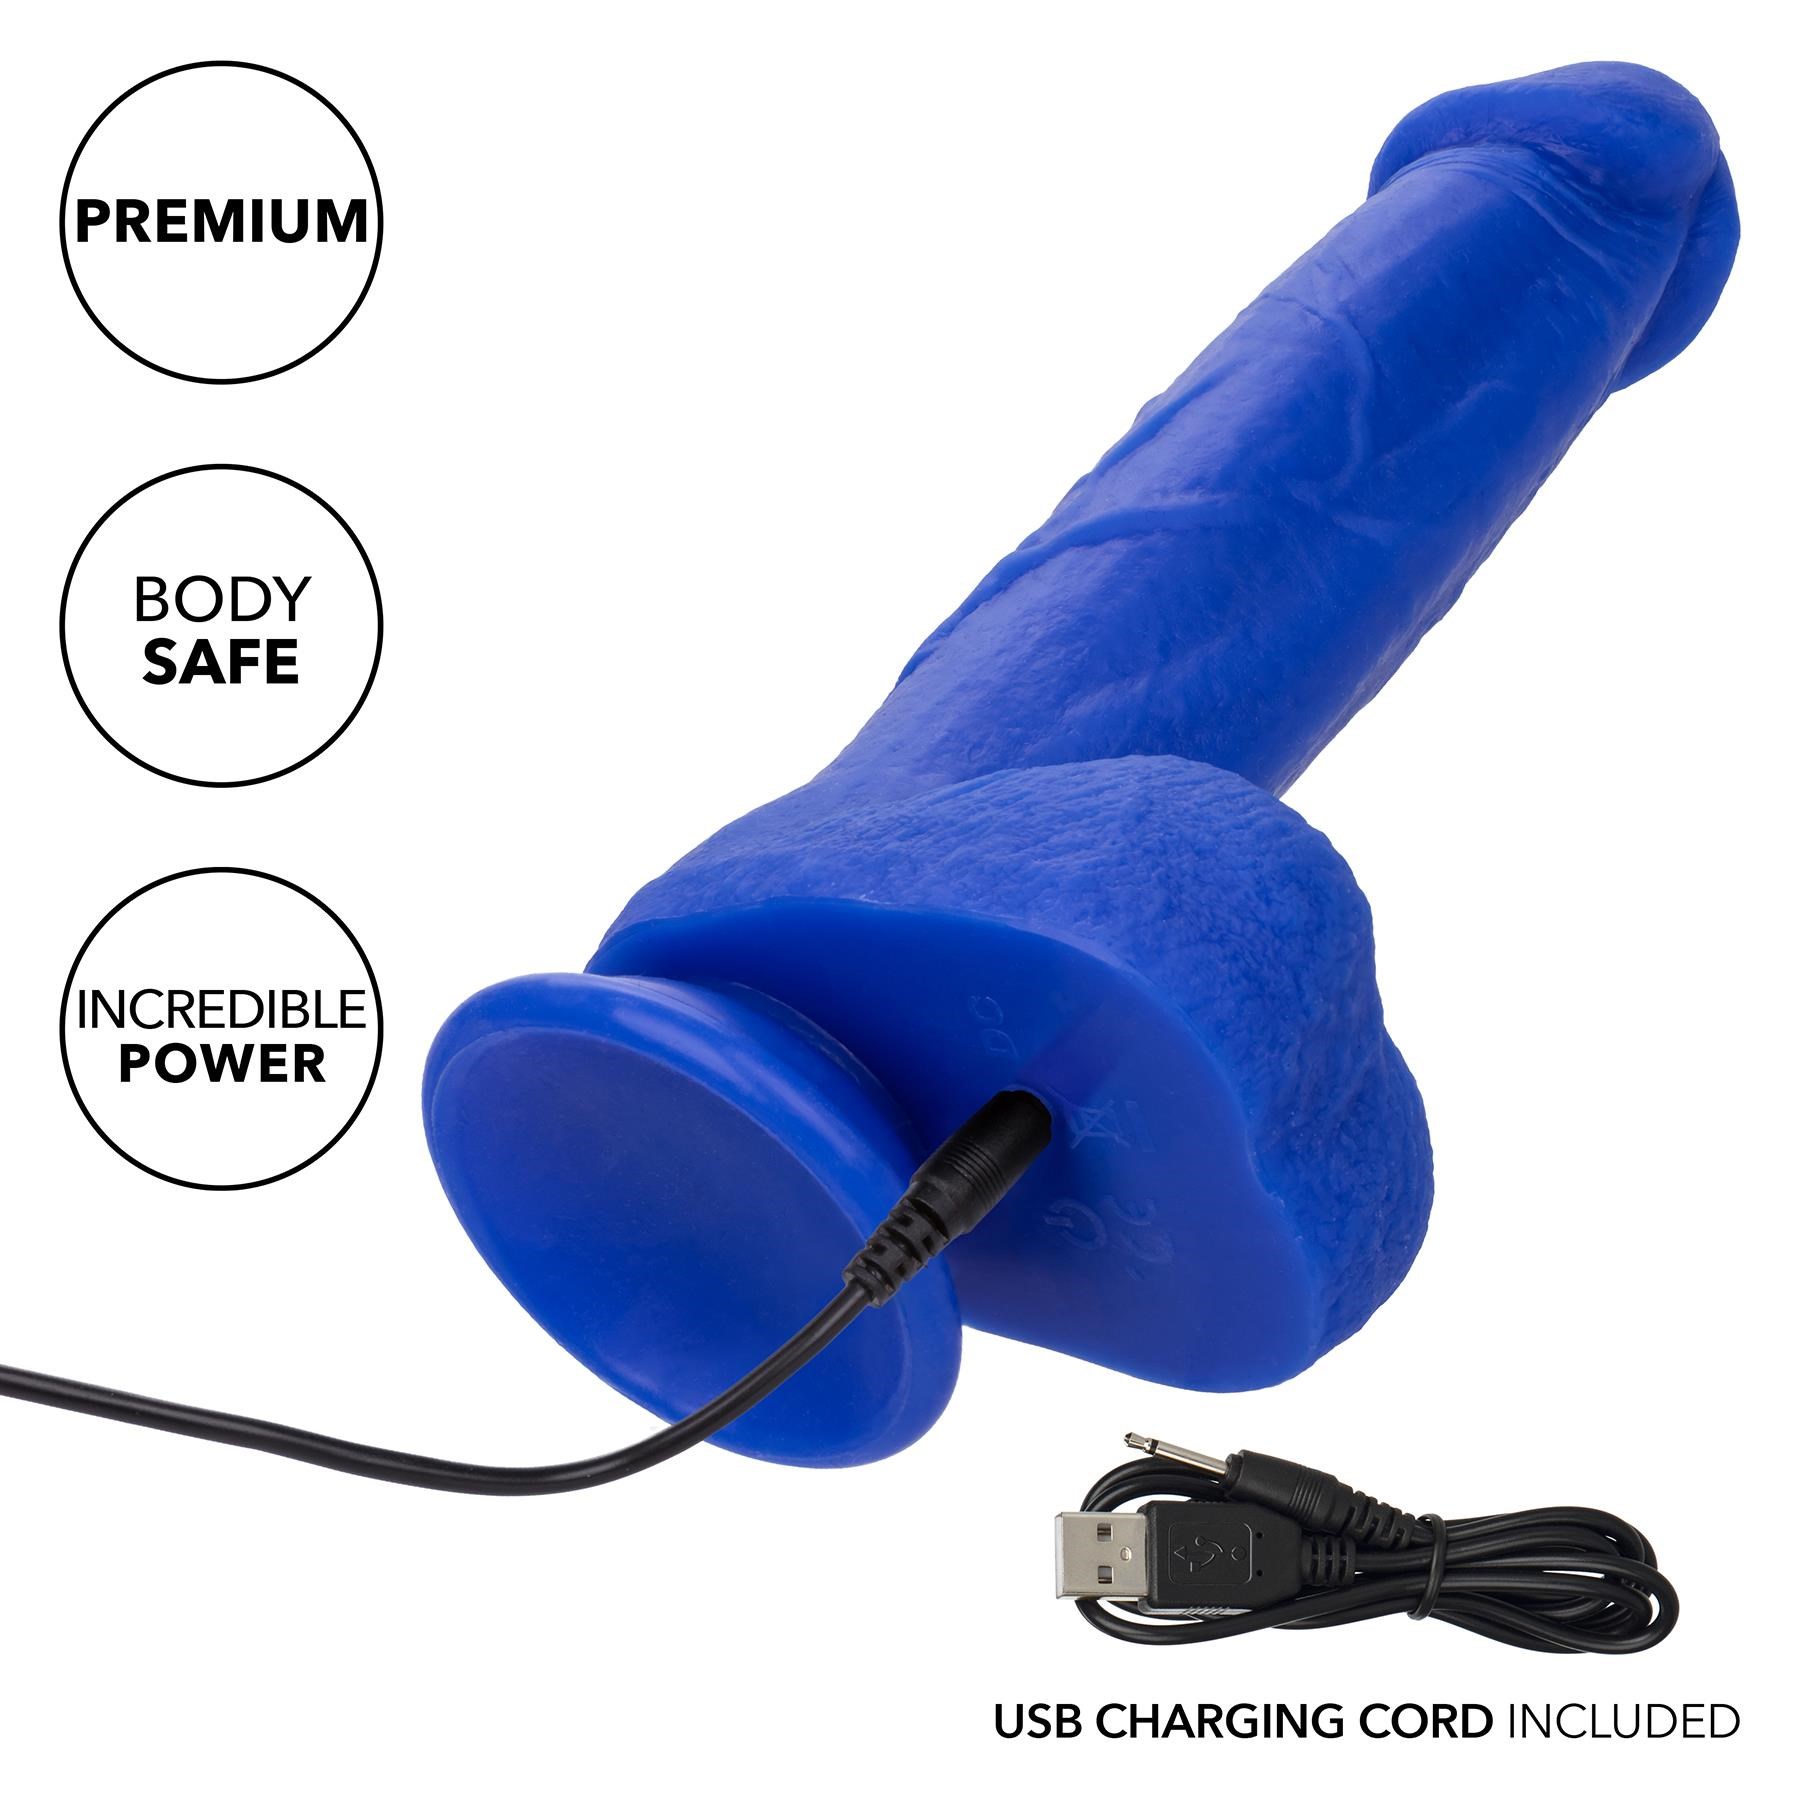 Admiral 8 Inch Vibrating Captain Dildo - Product Shot - Showing Where Charging Cable is Placed